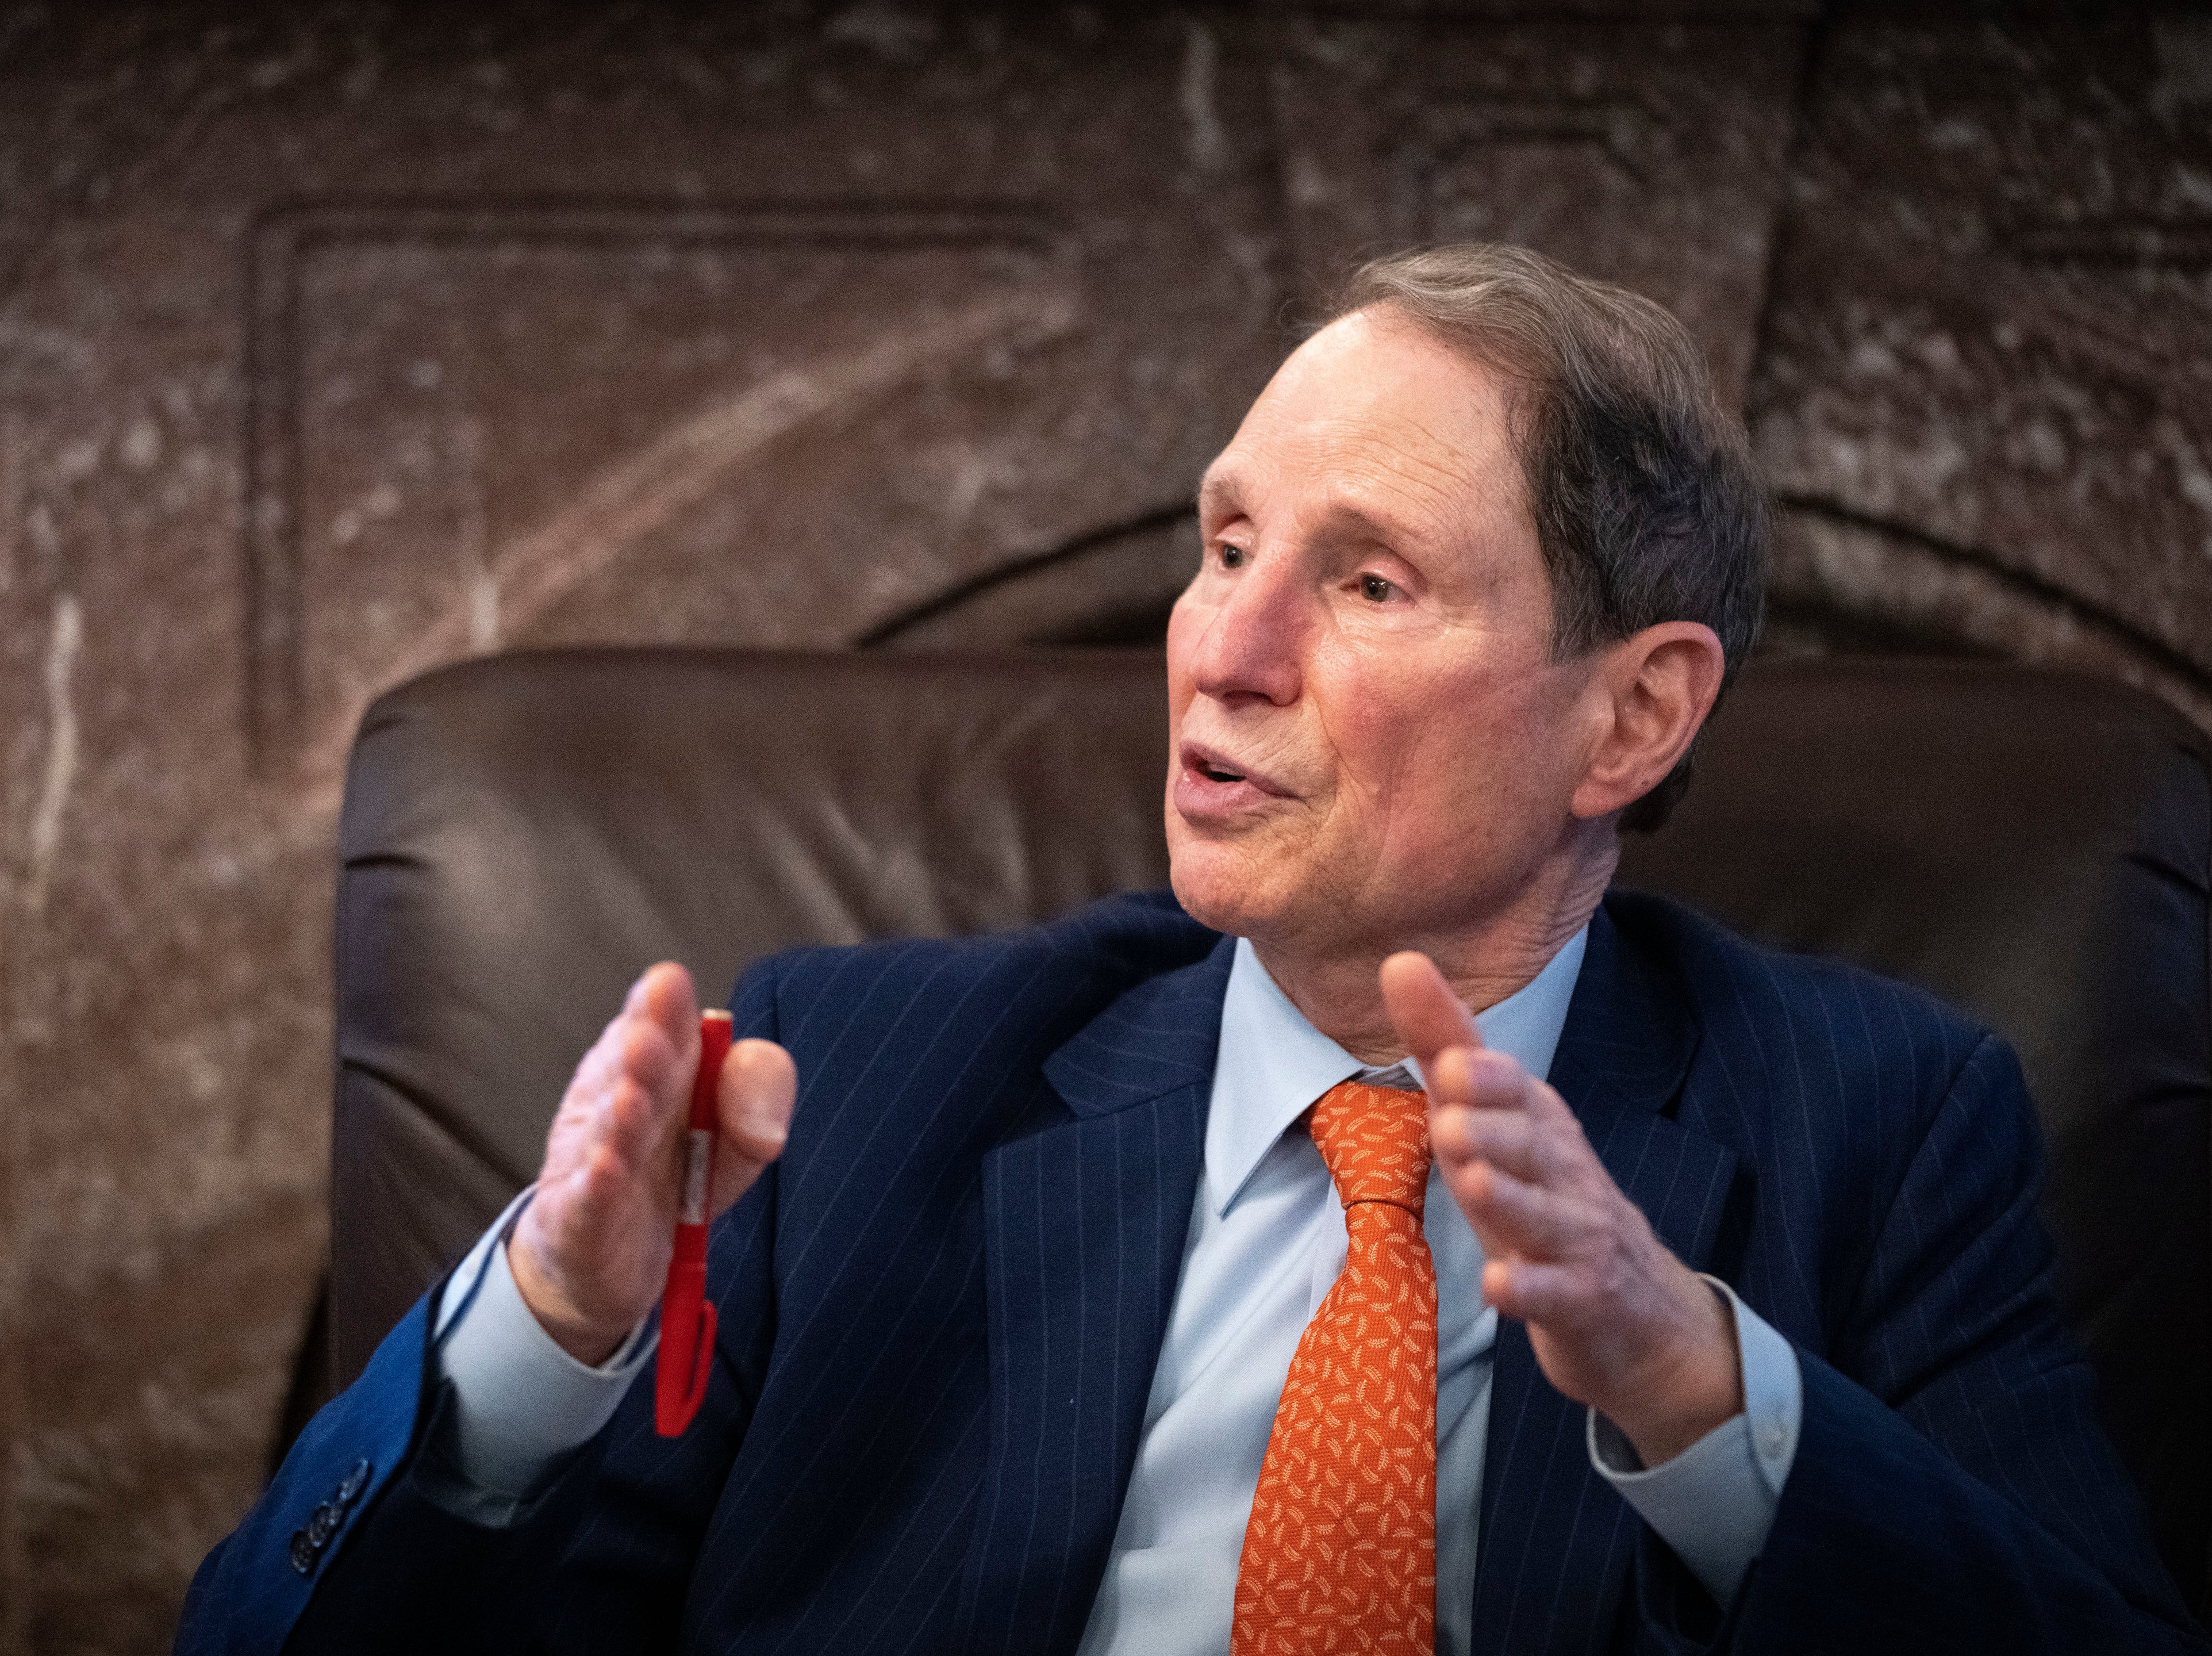 Sen. Ron Wyden, D-Oregon, speaks to reporters about a corporate minimum tax plan at the U.S. Capitol on Oct. 26 in Washington, D.C. Wyden feuded with Tesla CEO Elon Musk over the senator's proposal to tax stock investments held by billionaires annually.